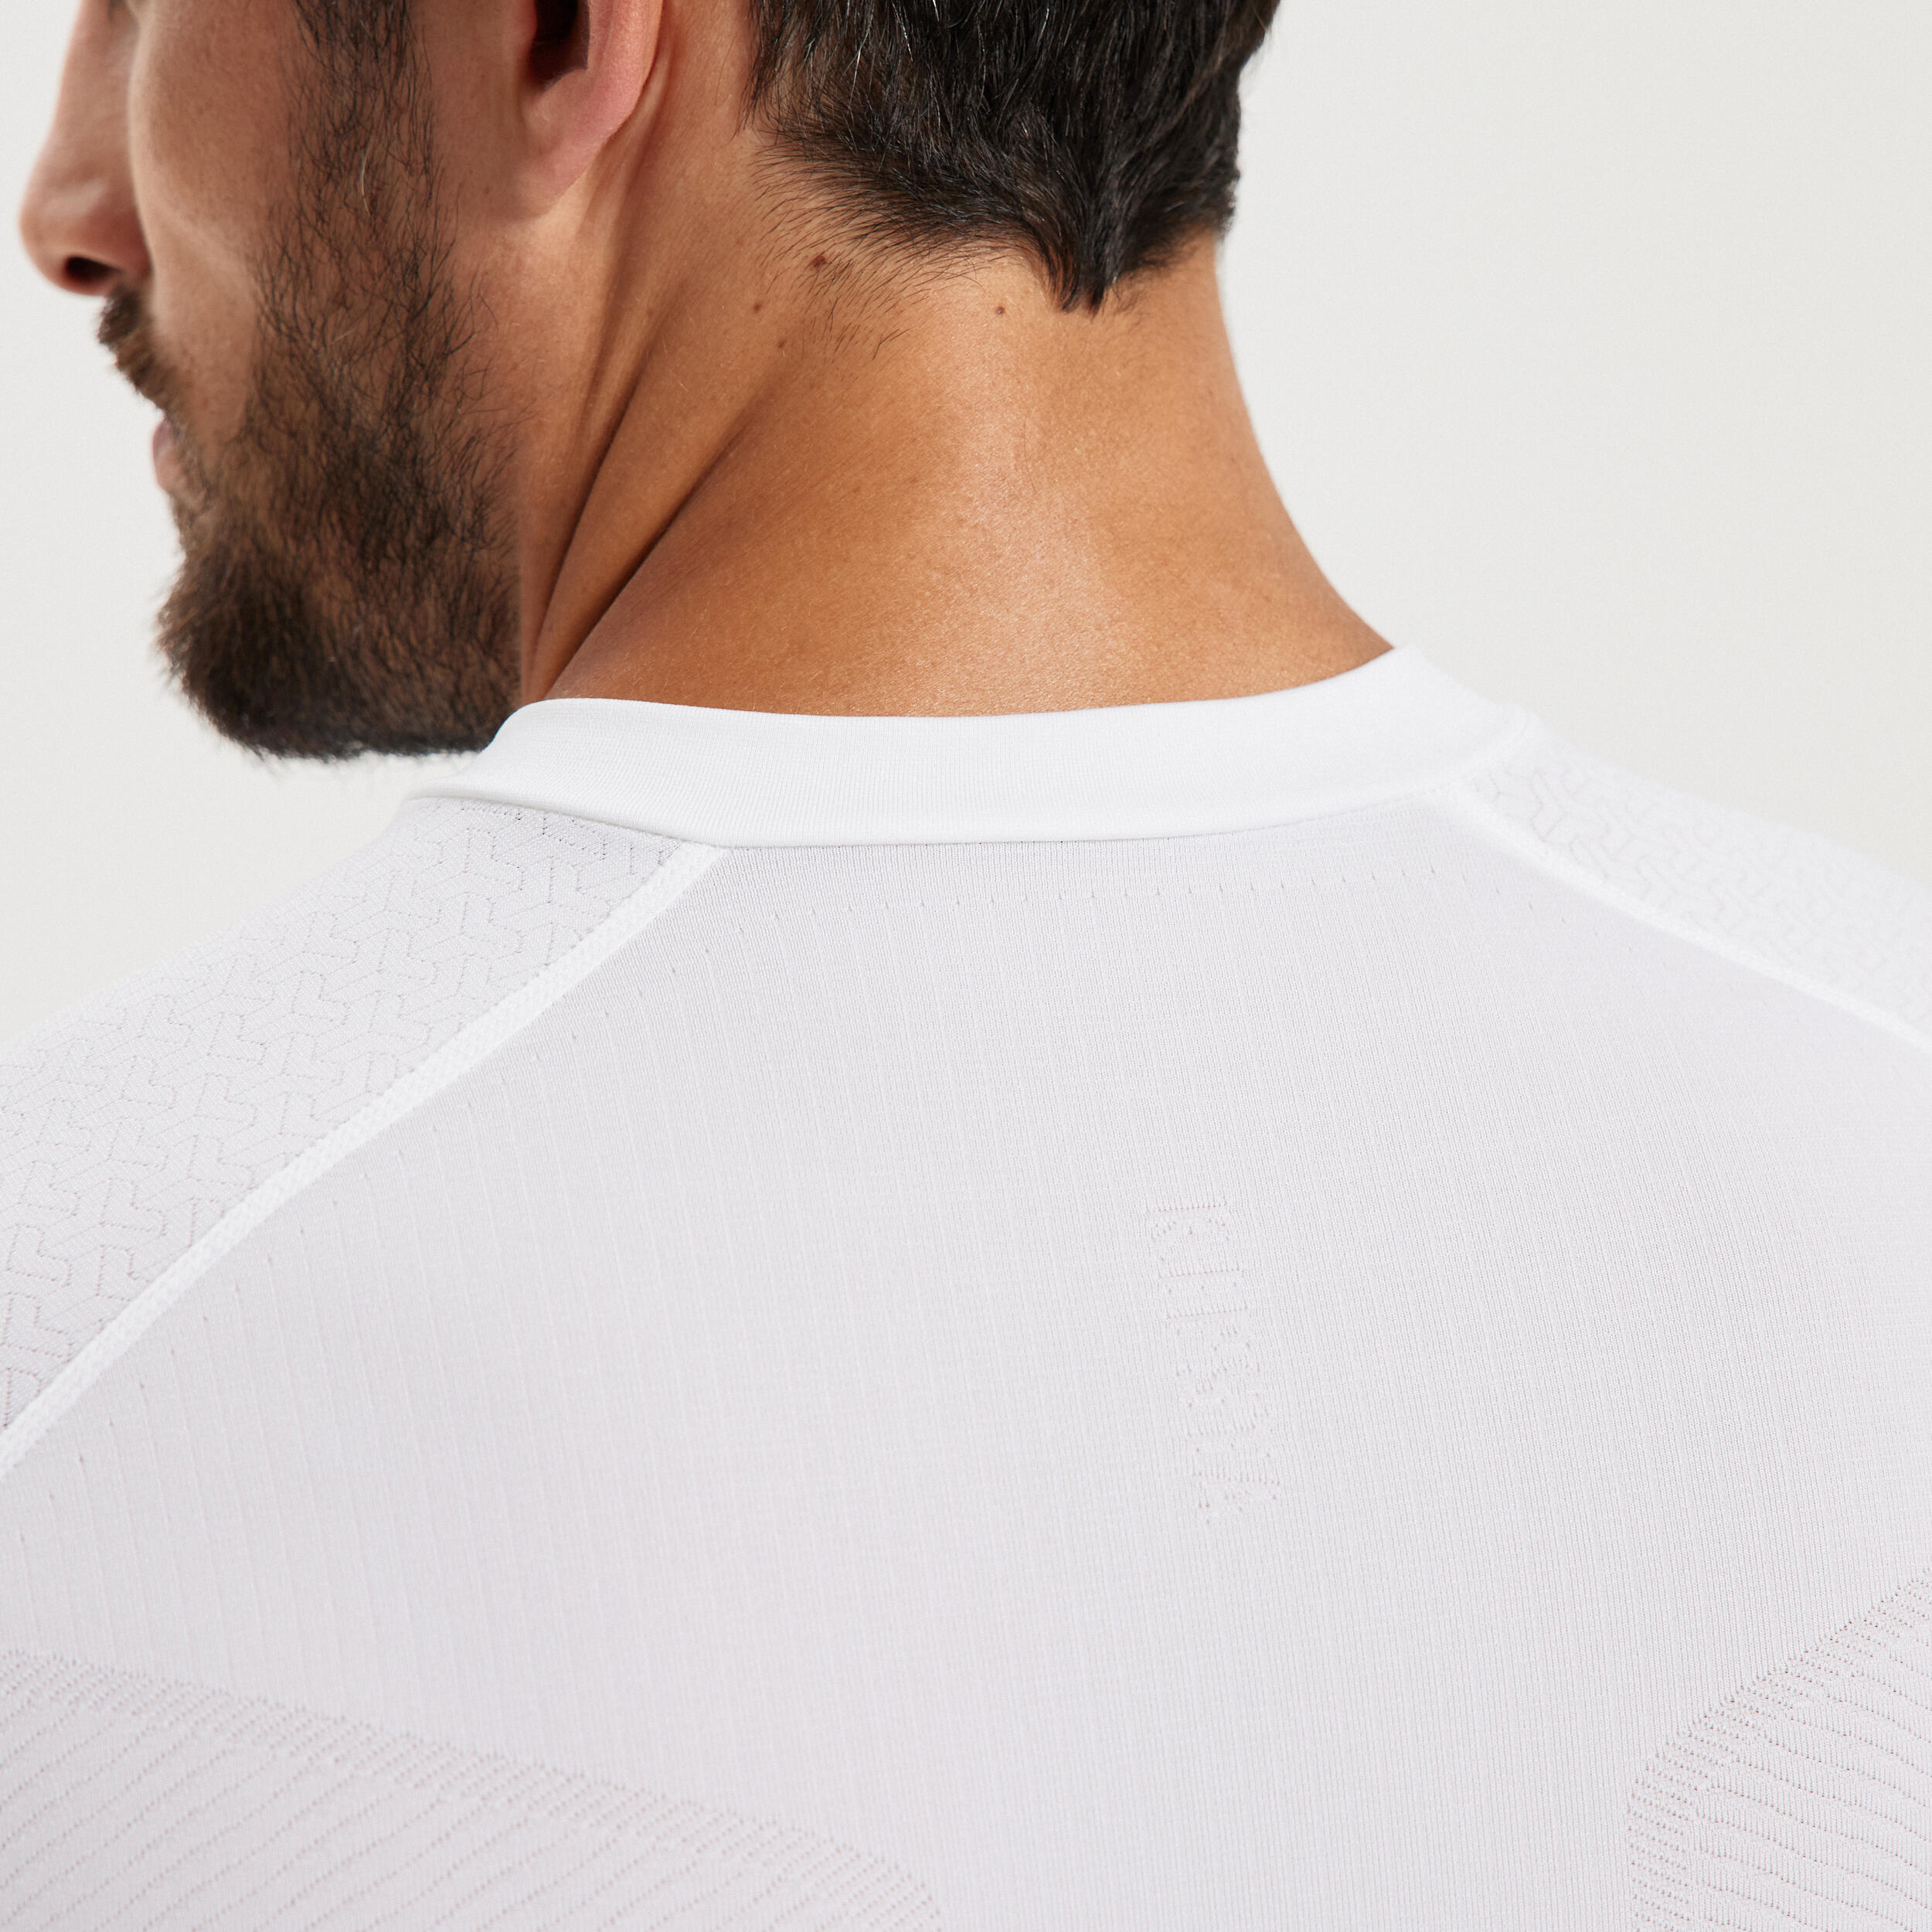 Adult Long-Sleeved Thermal Base Layer Top Keepdry 500 - White 5/13